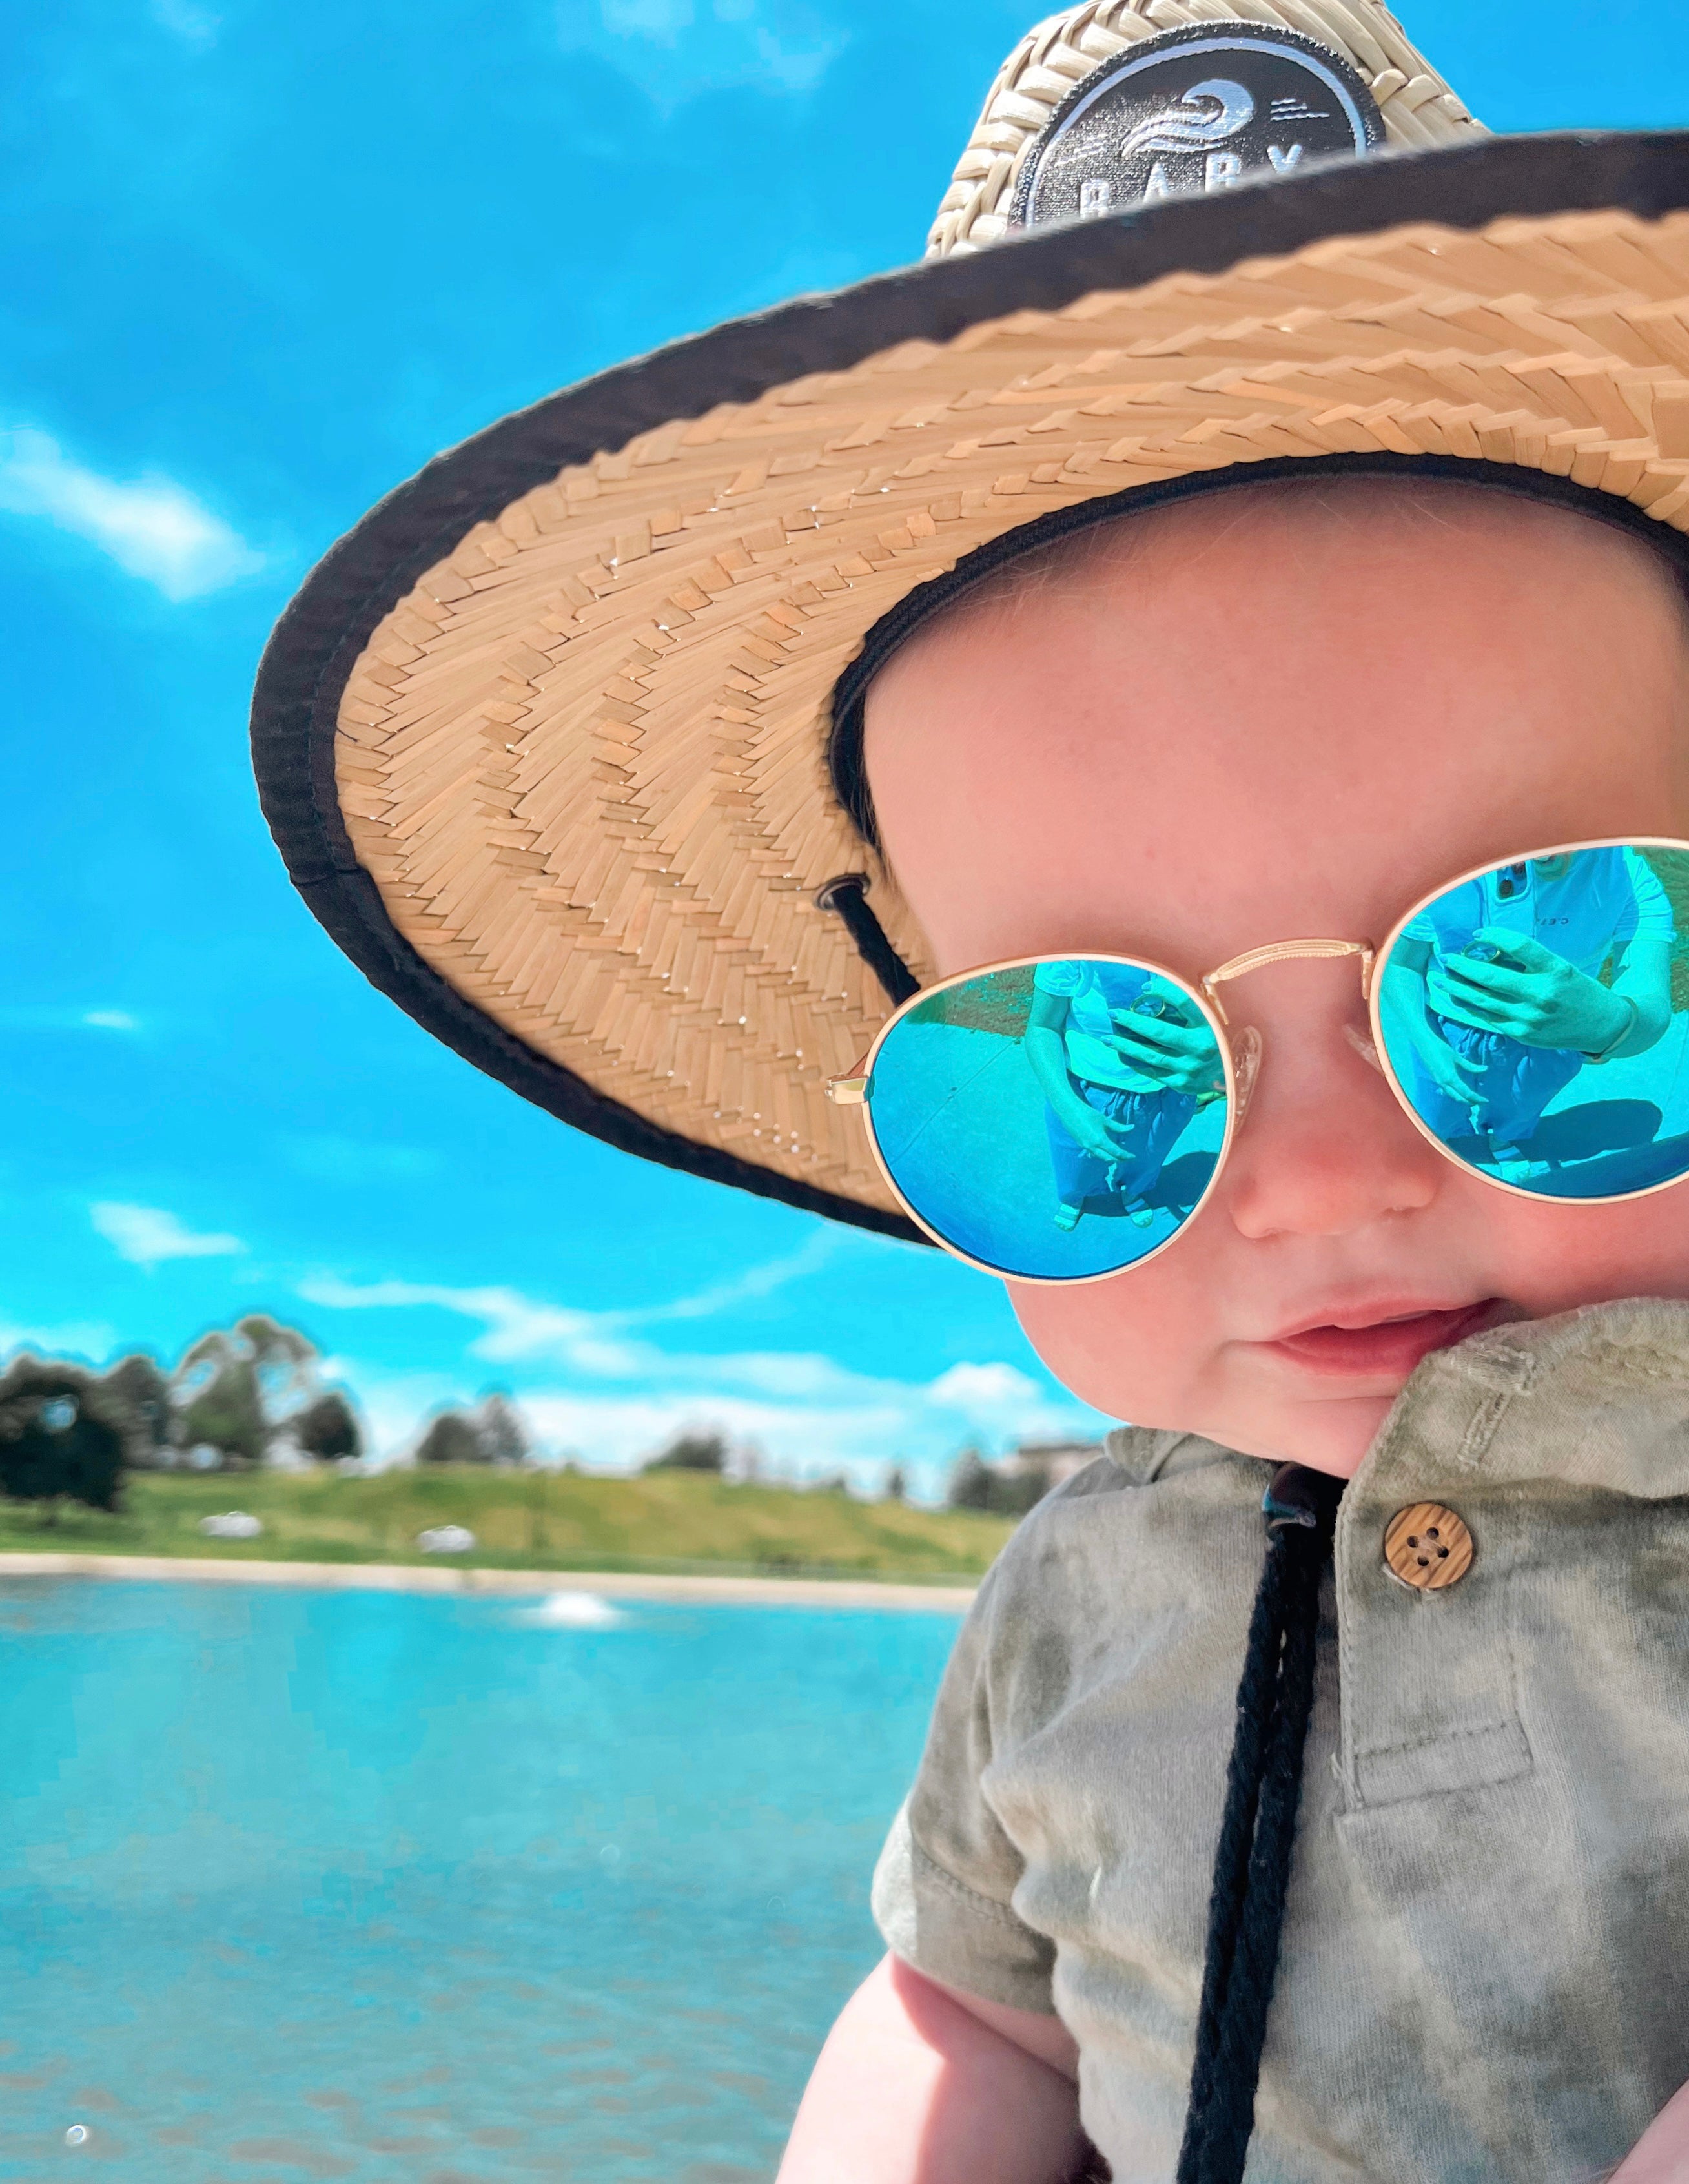 Baby with a sun hat and sunglasses enjoying the sun by a lake with blue reflective lenses